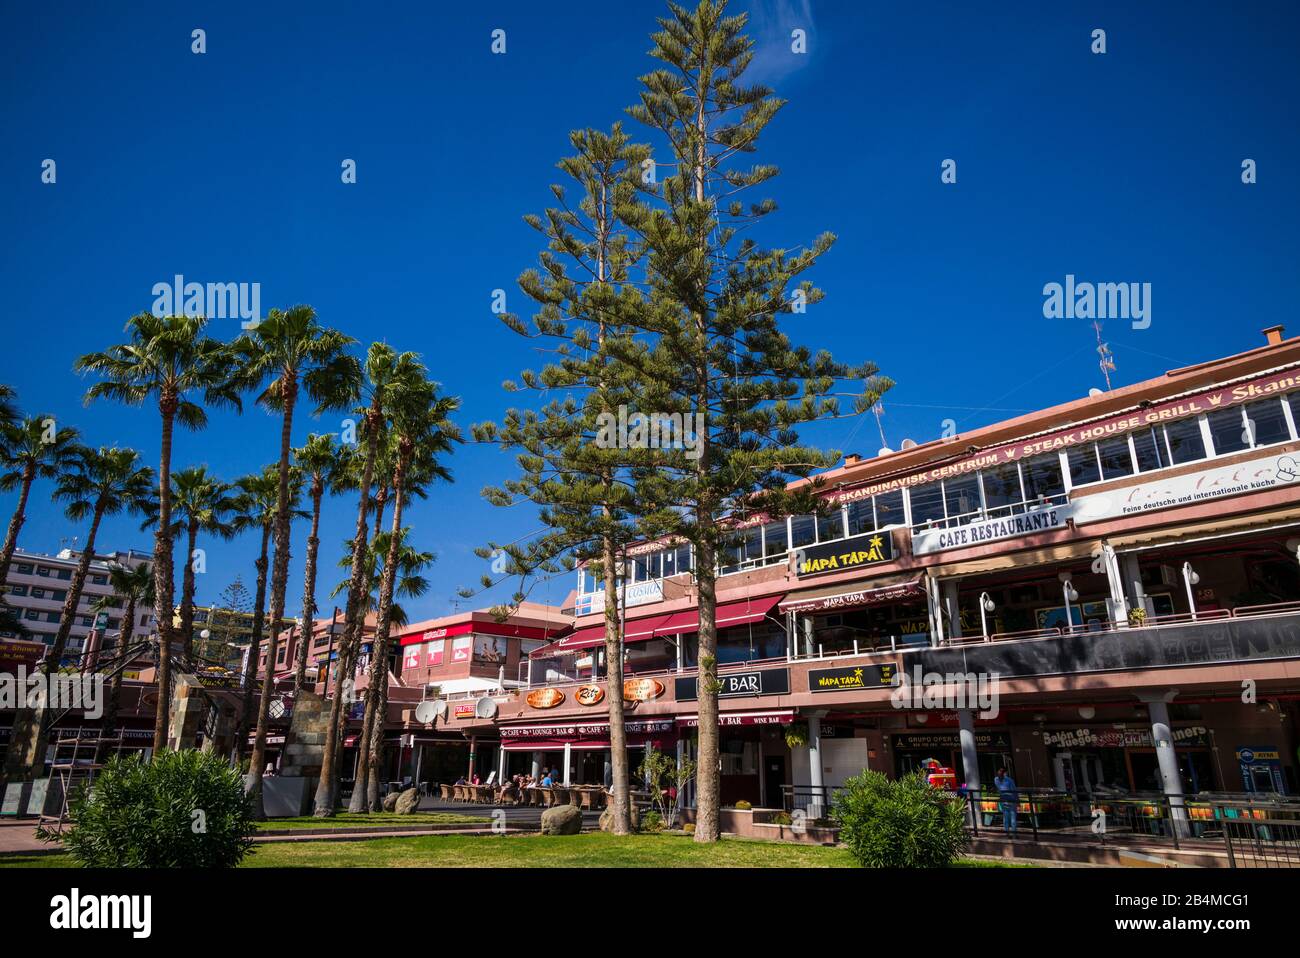 The Yumbo High Resolution Stock Photography and Images - Alamy